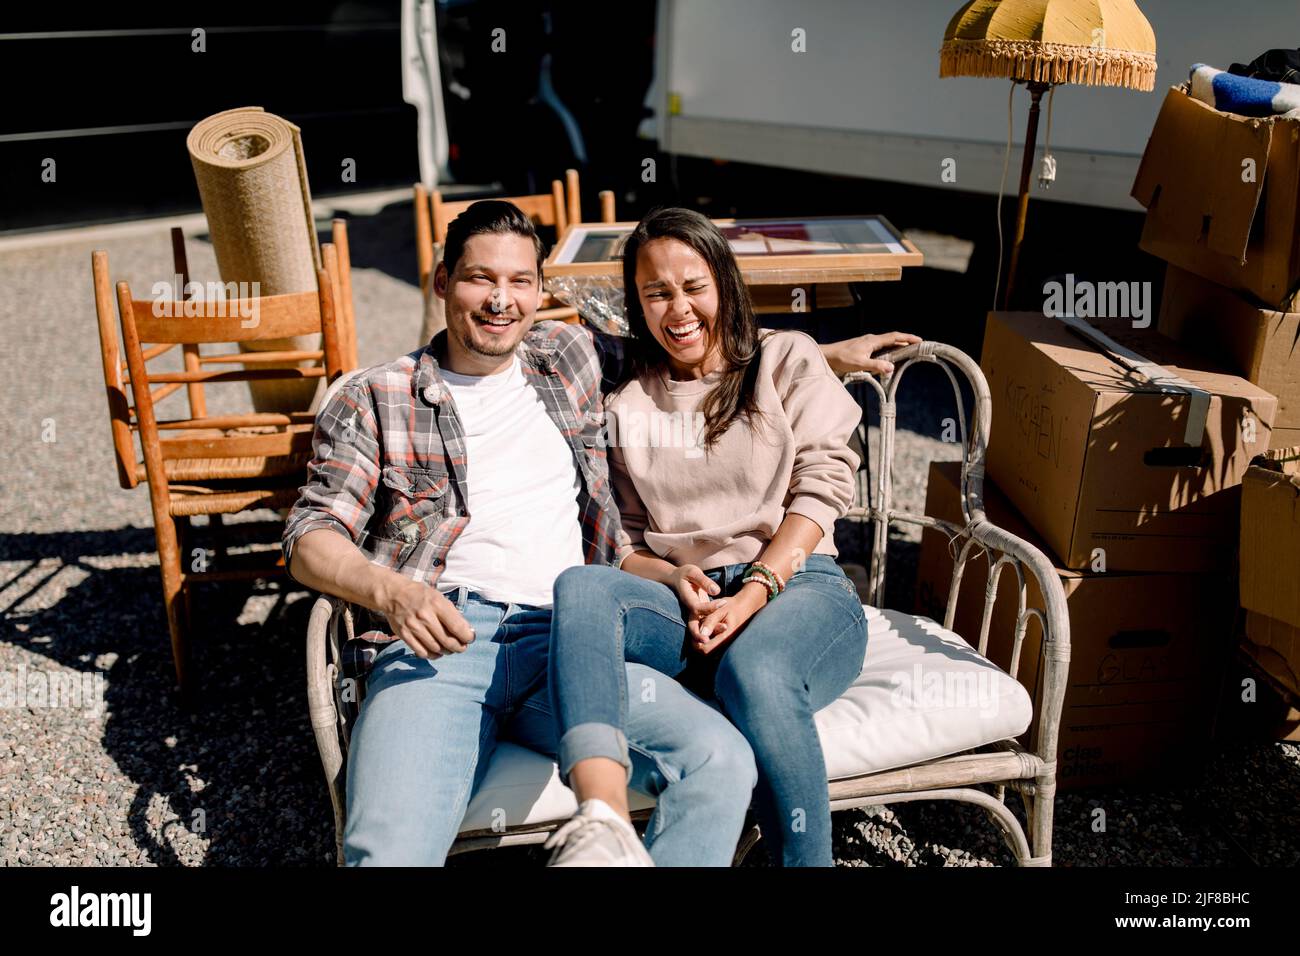 Portrait of smiling couple sitting on chair during sunny day Stock Photo